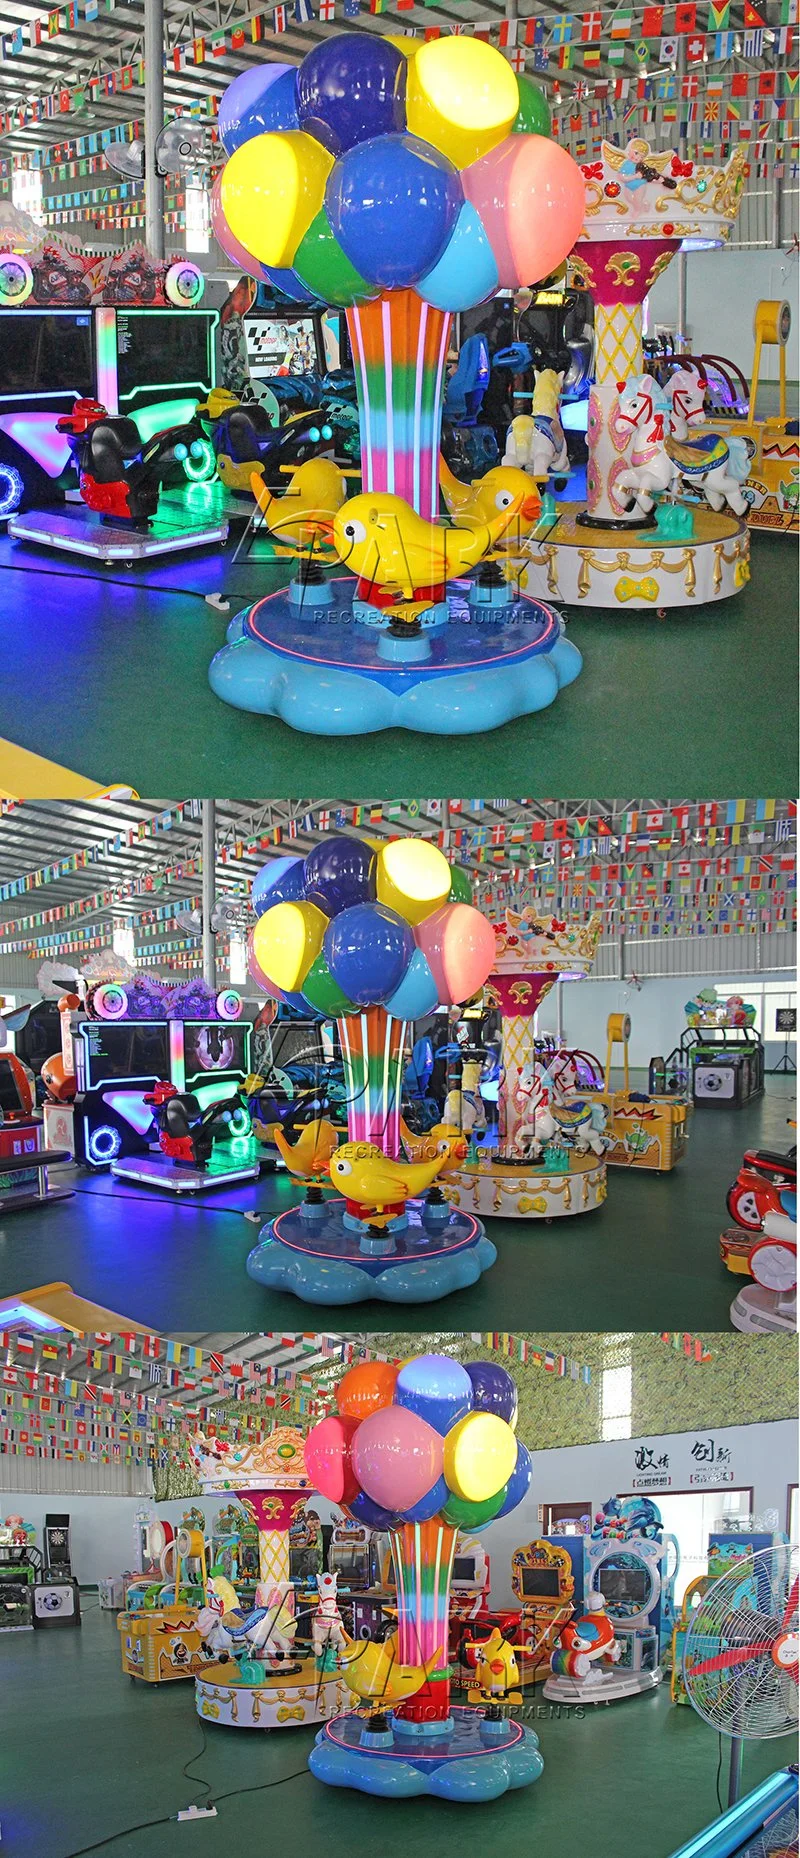 Coin-Operated Kiddies Ride Machine Named Colorful Bubbles for Three Players